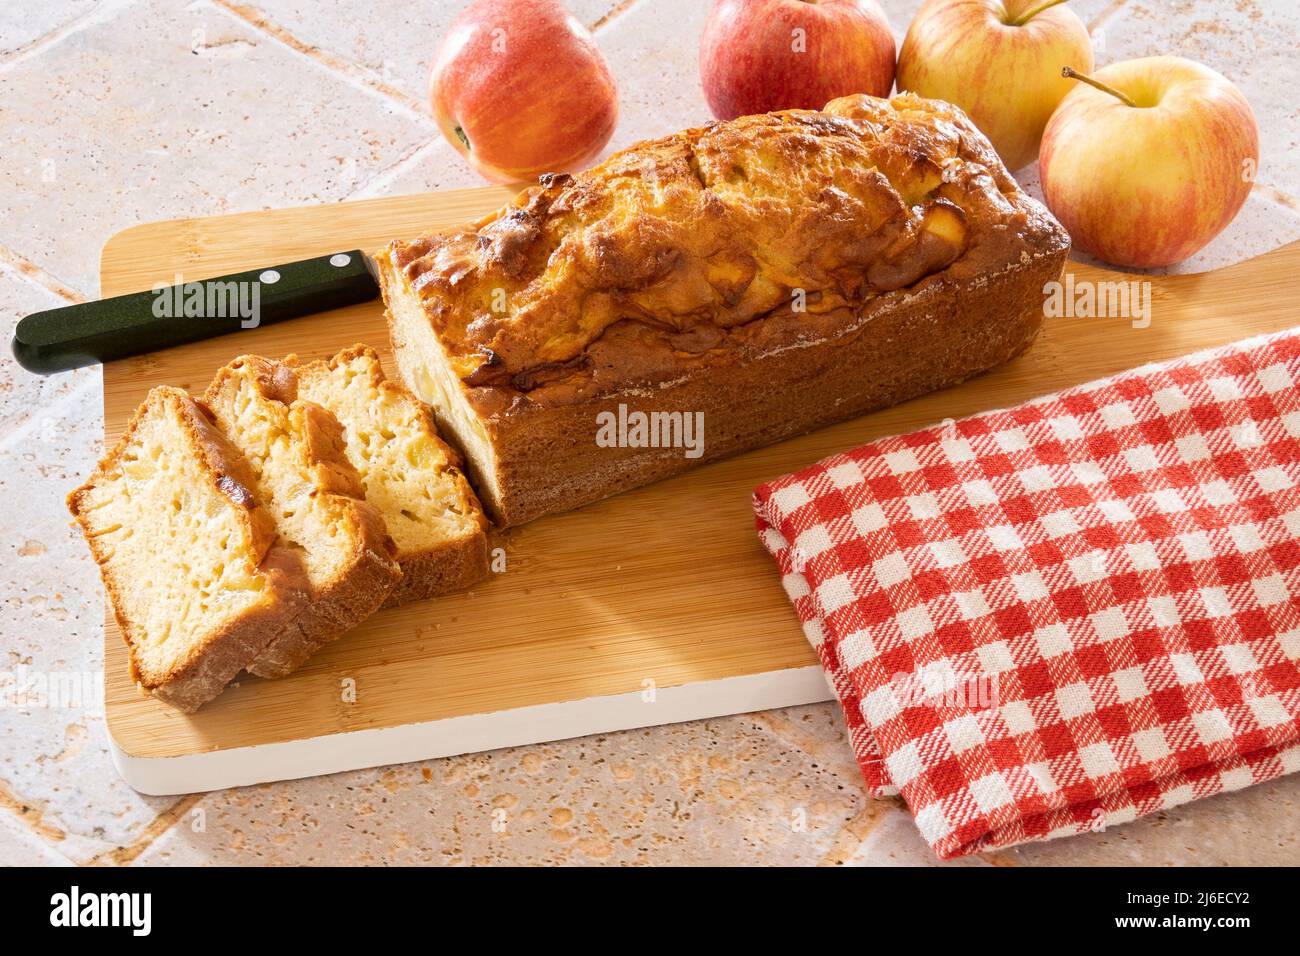 a cut apple cake on a wooden board Stock Photo